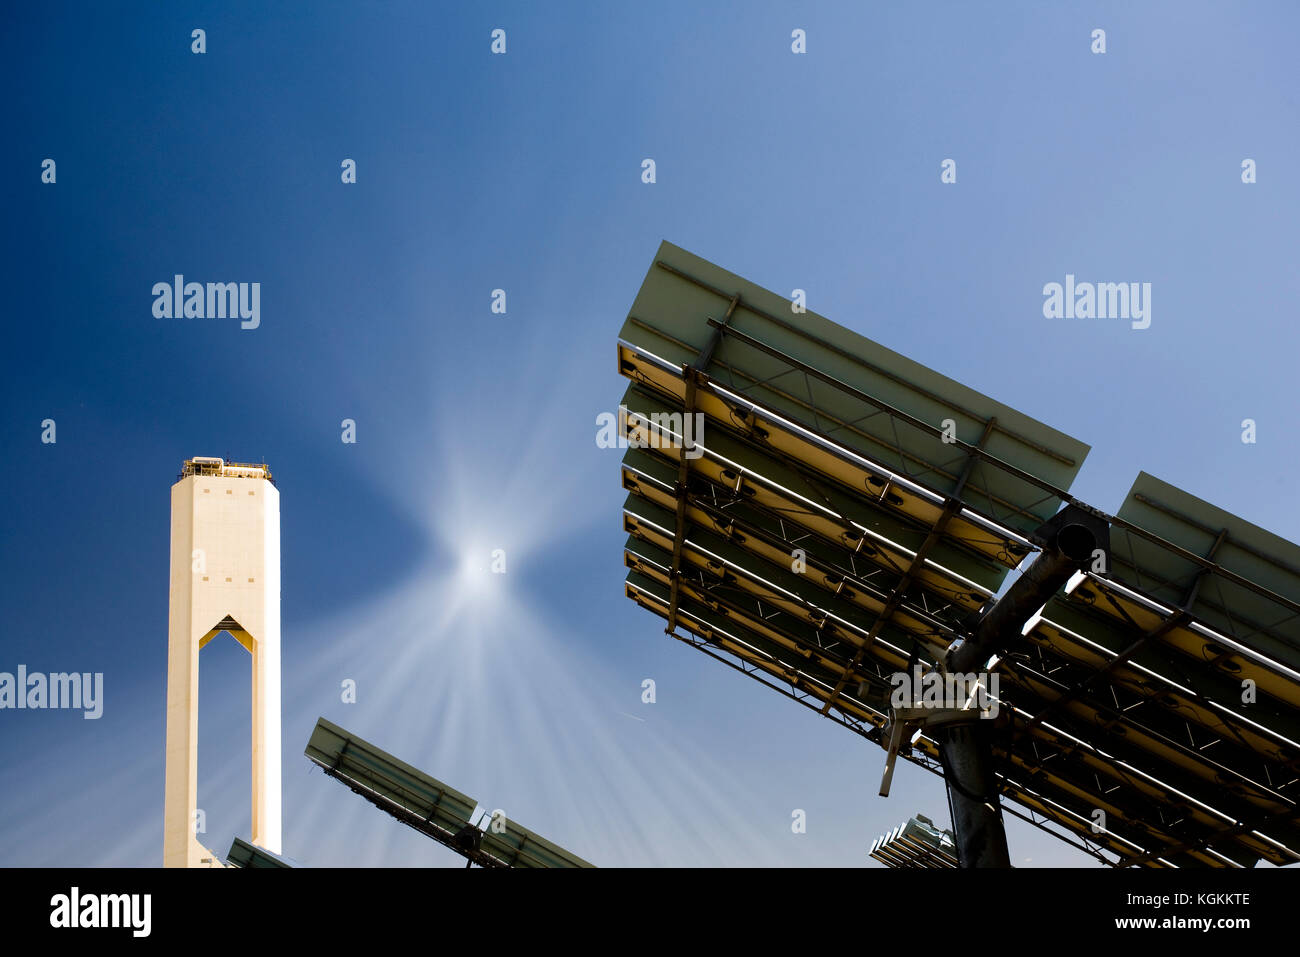 Tower of a solar plant, Seville, Spain Stock Photo